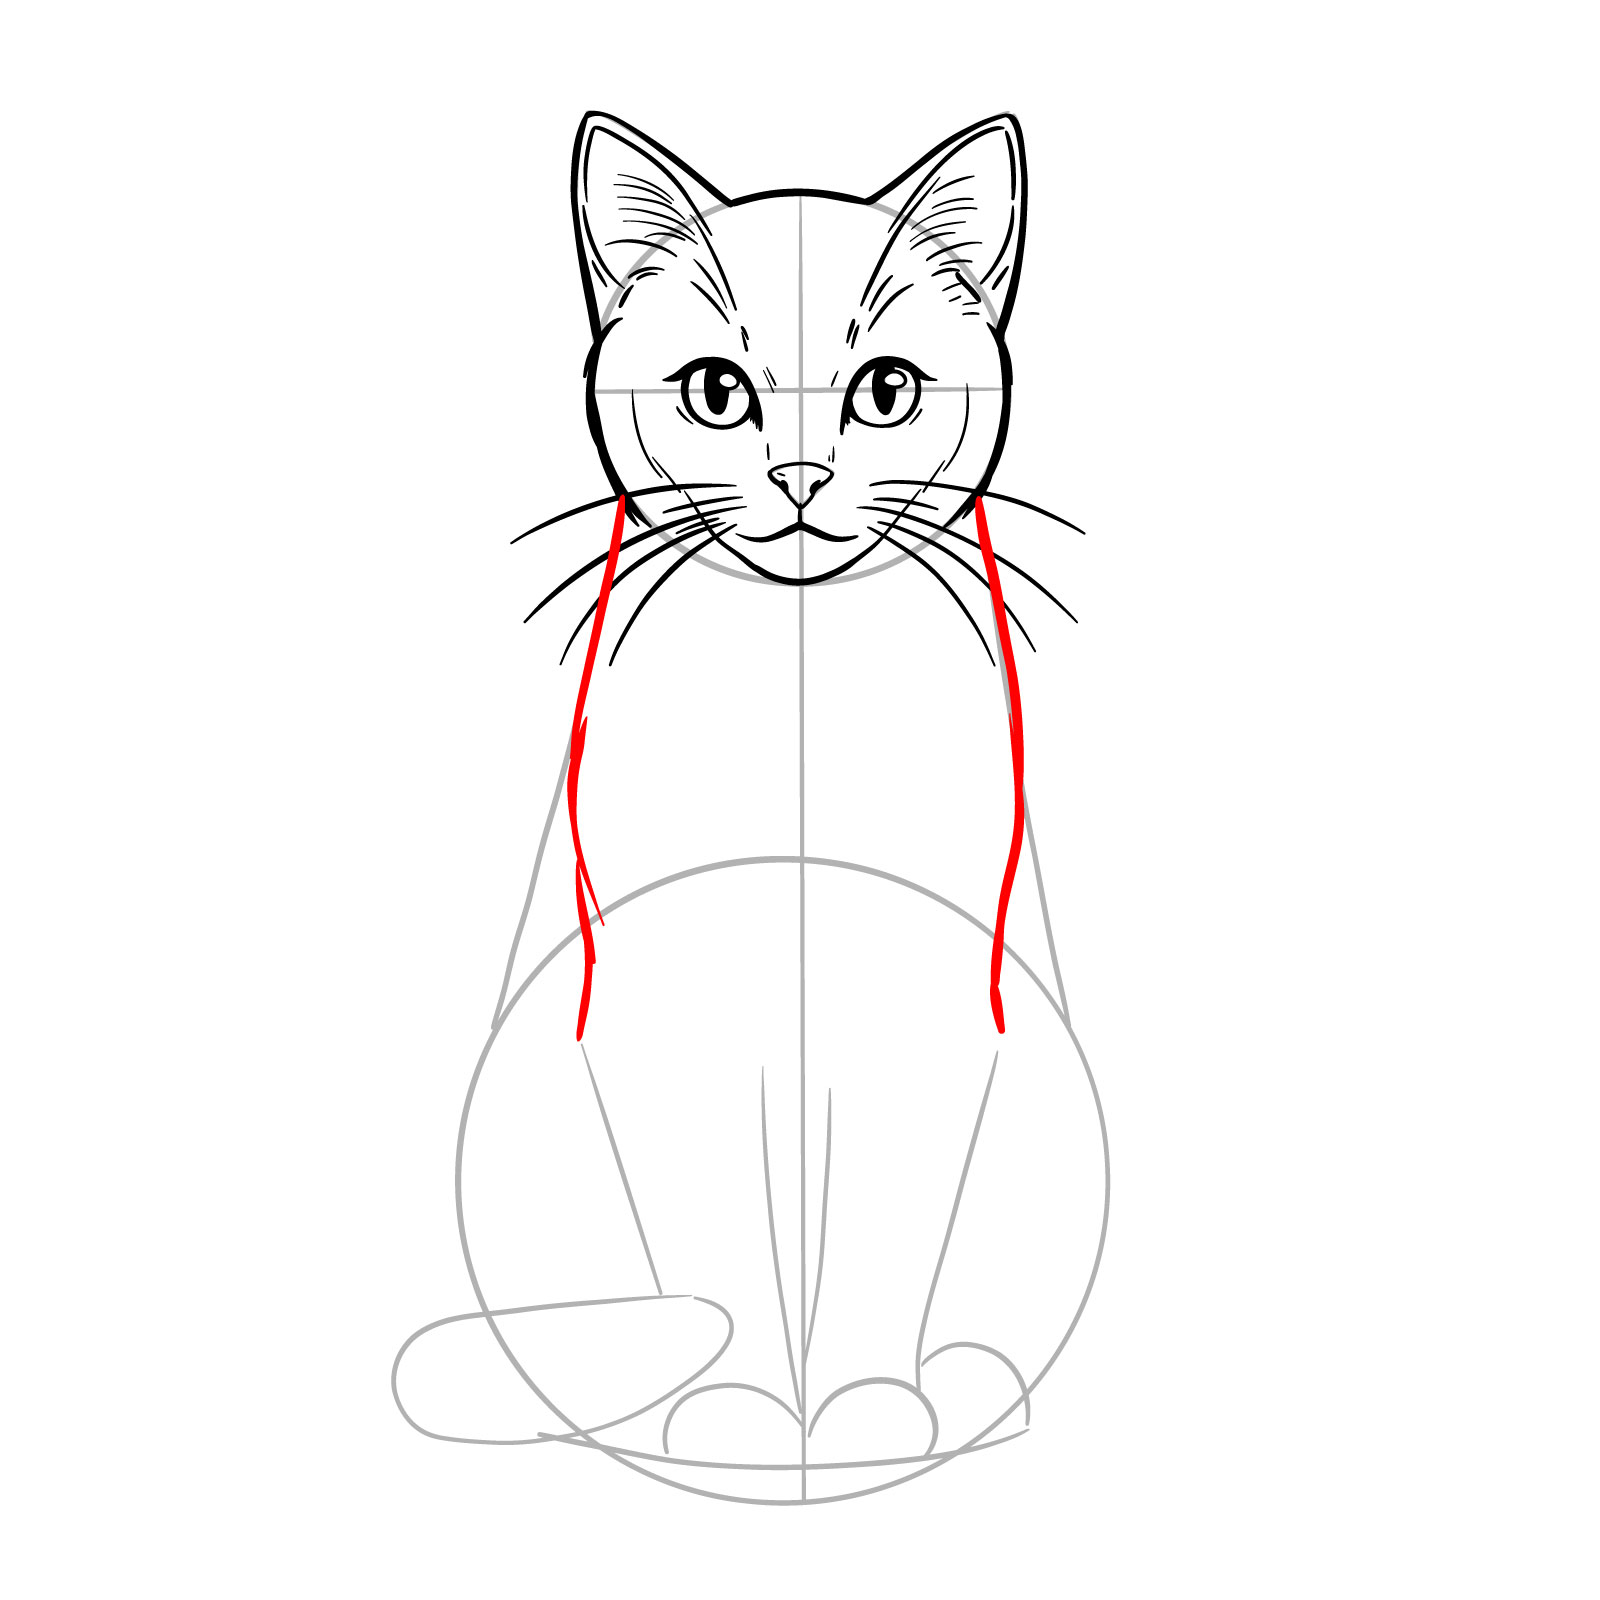 Sketch shaping the neck and upper body of a sitting cat - step 11